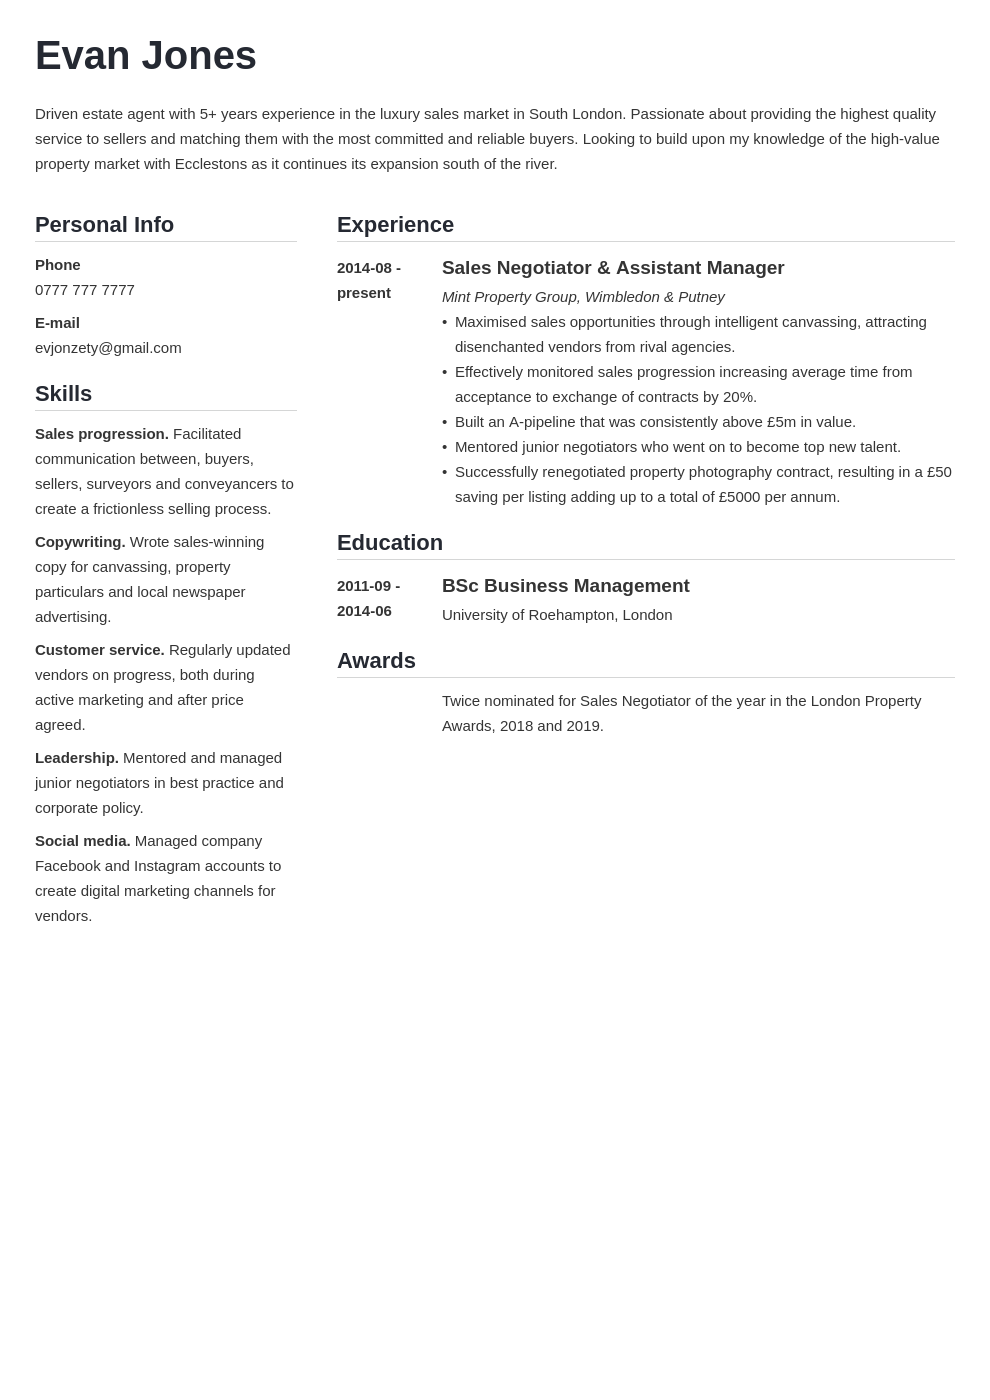 cv template in word free download